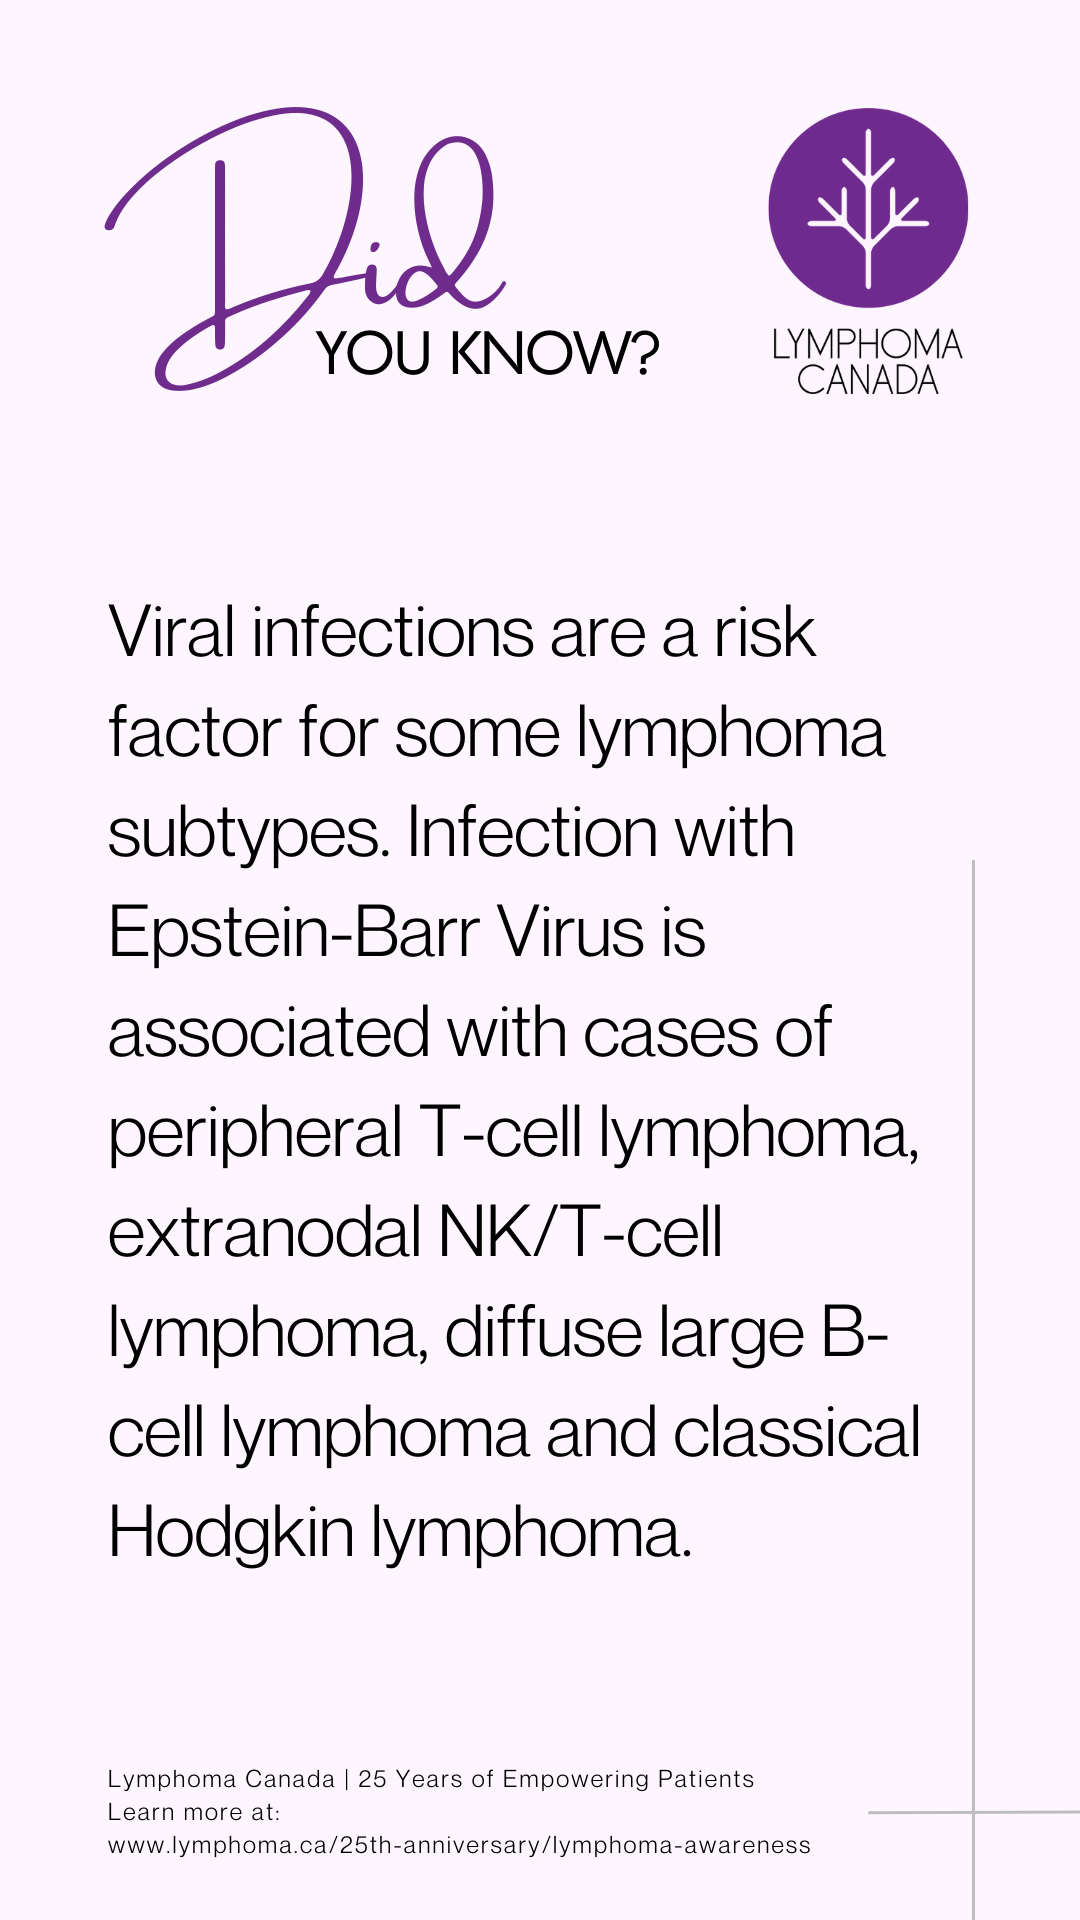 Story Infographic - Viral infections are a risk factor for some lymphoma subtypes